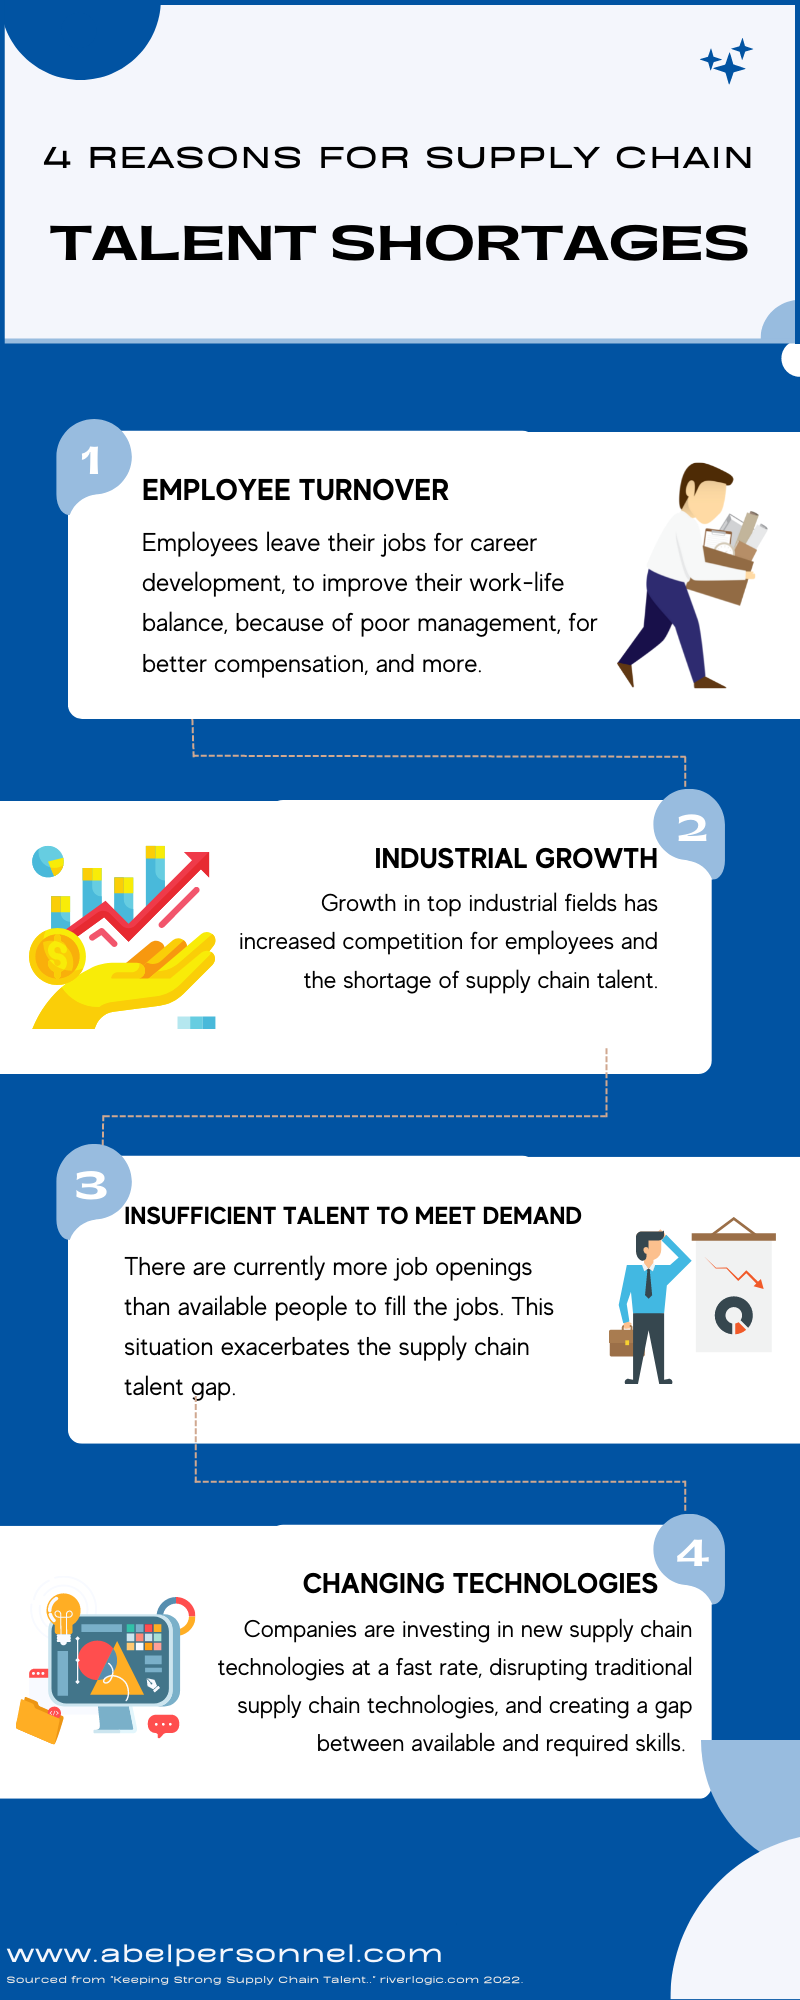 4 REASONS FOR SUPPLY CHAIN TALENT SHORTAGES